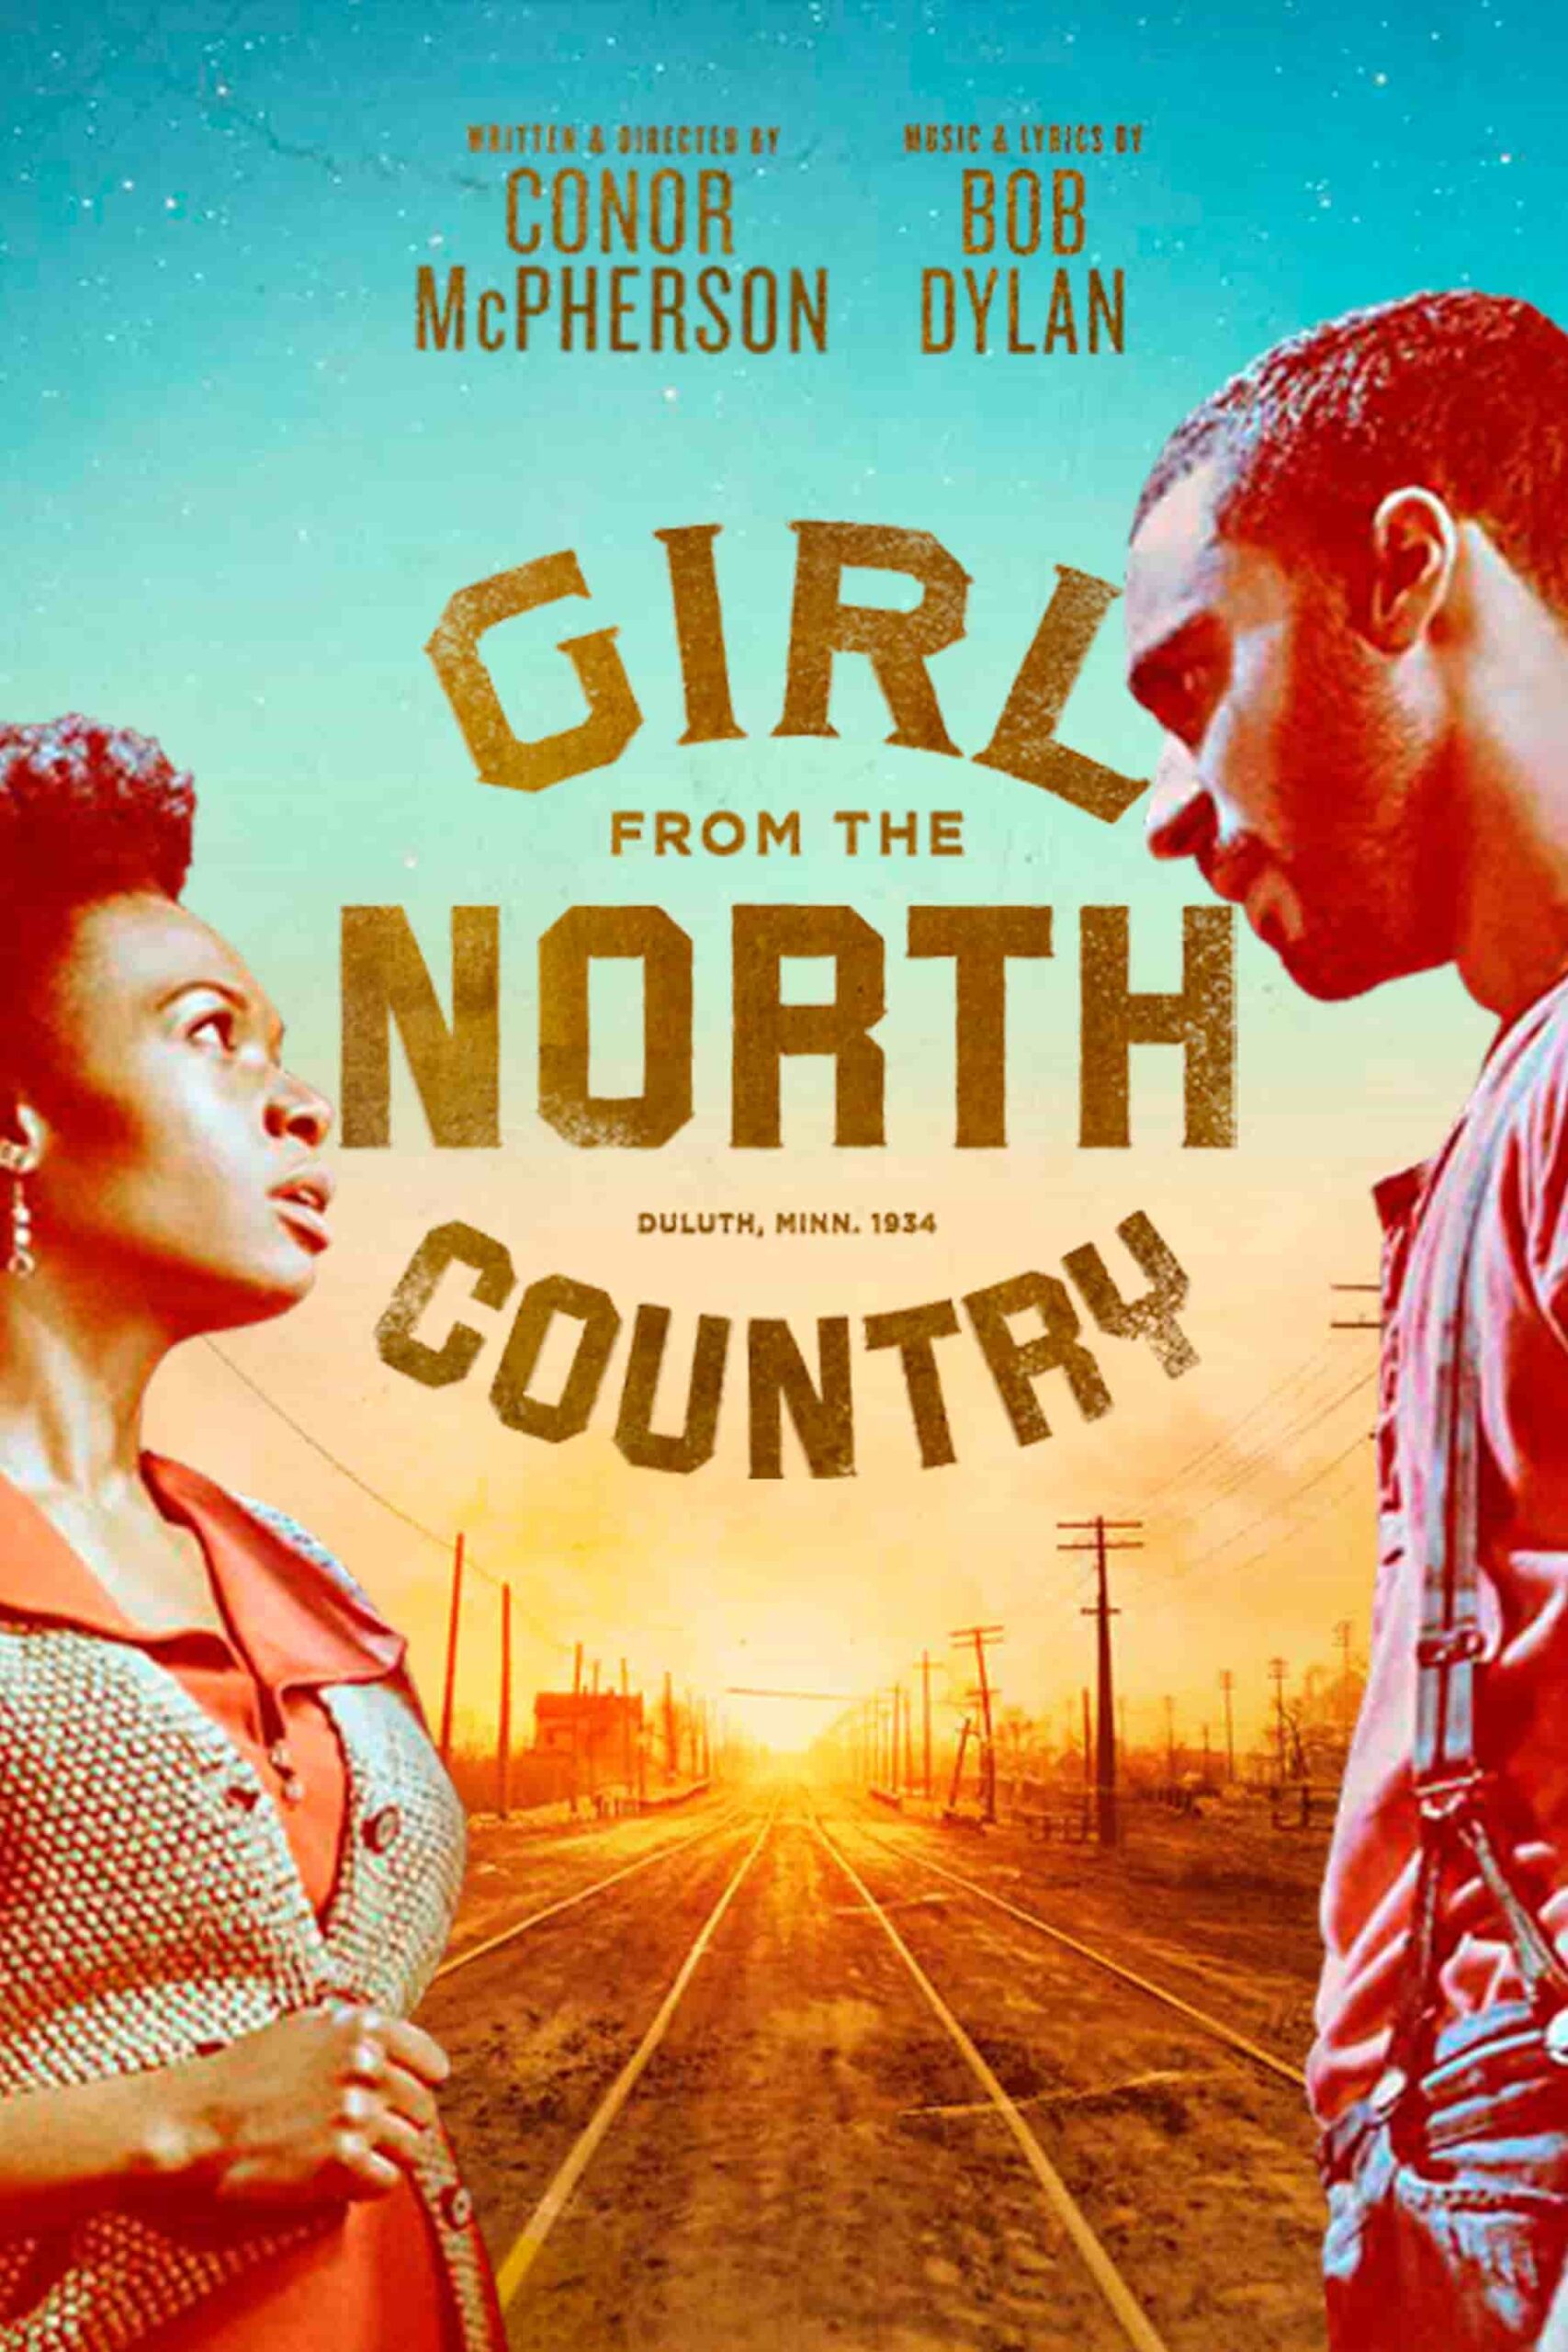 Girl from the North Country show poster